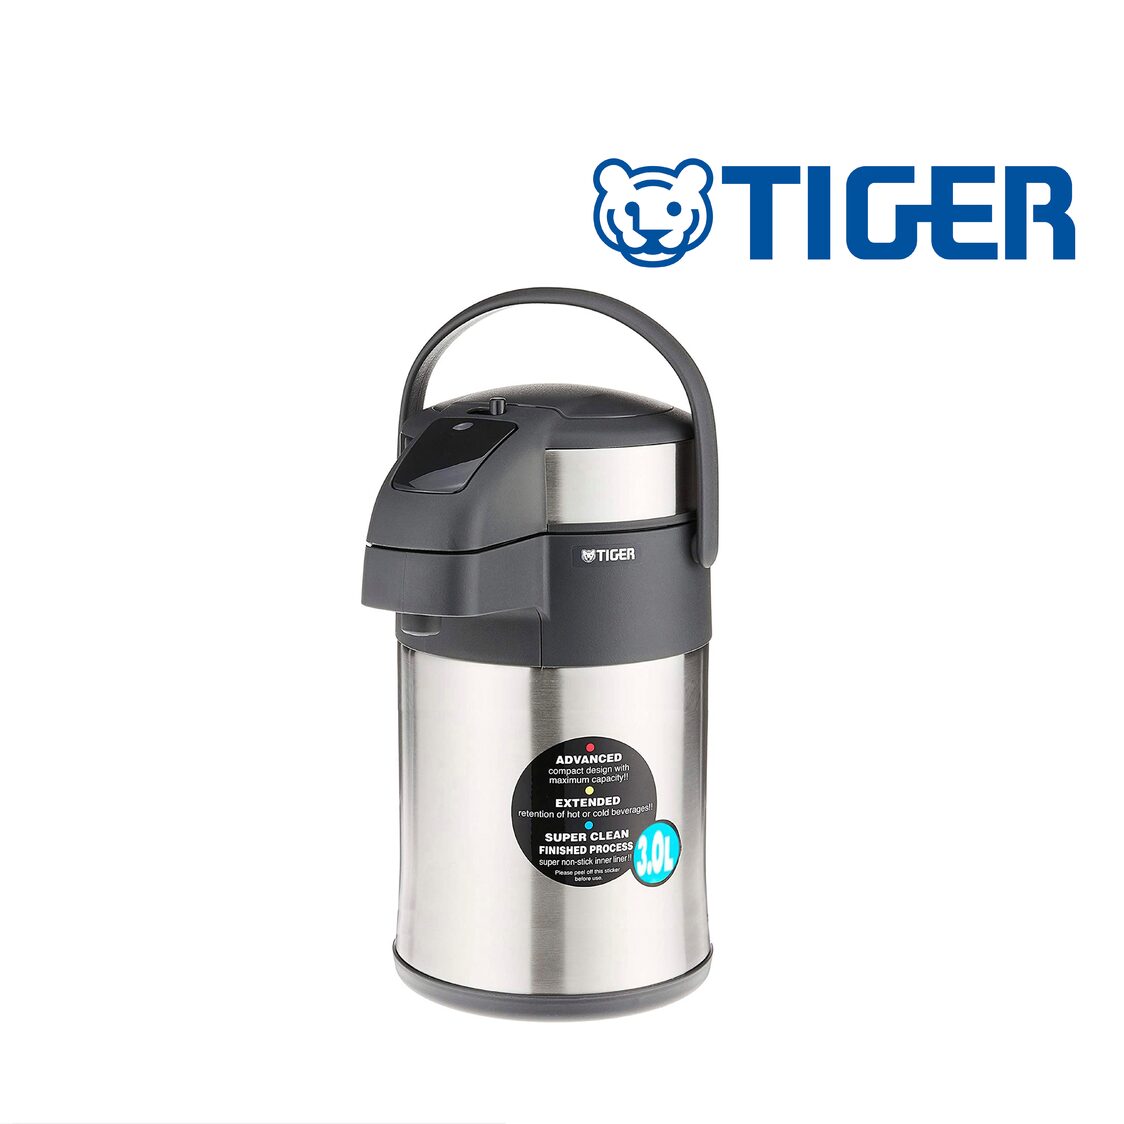 TIGER 30L Double Stainless Steel Air Pump Jug MAA-A302